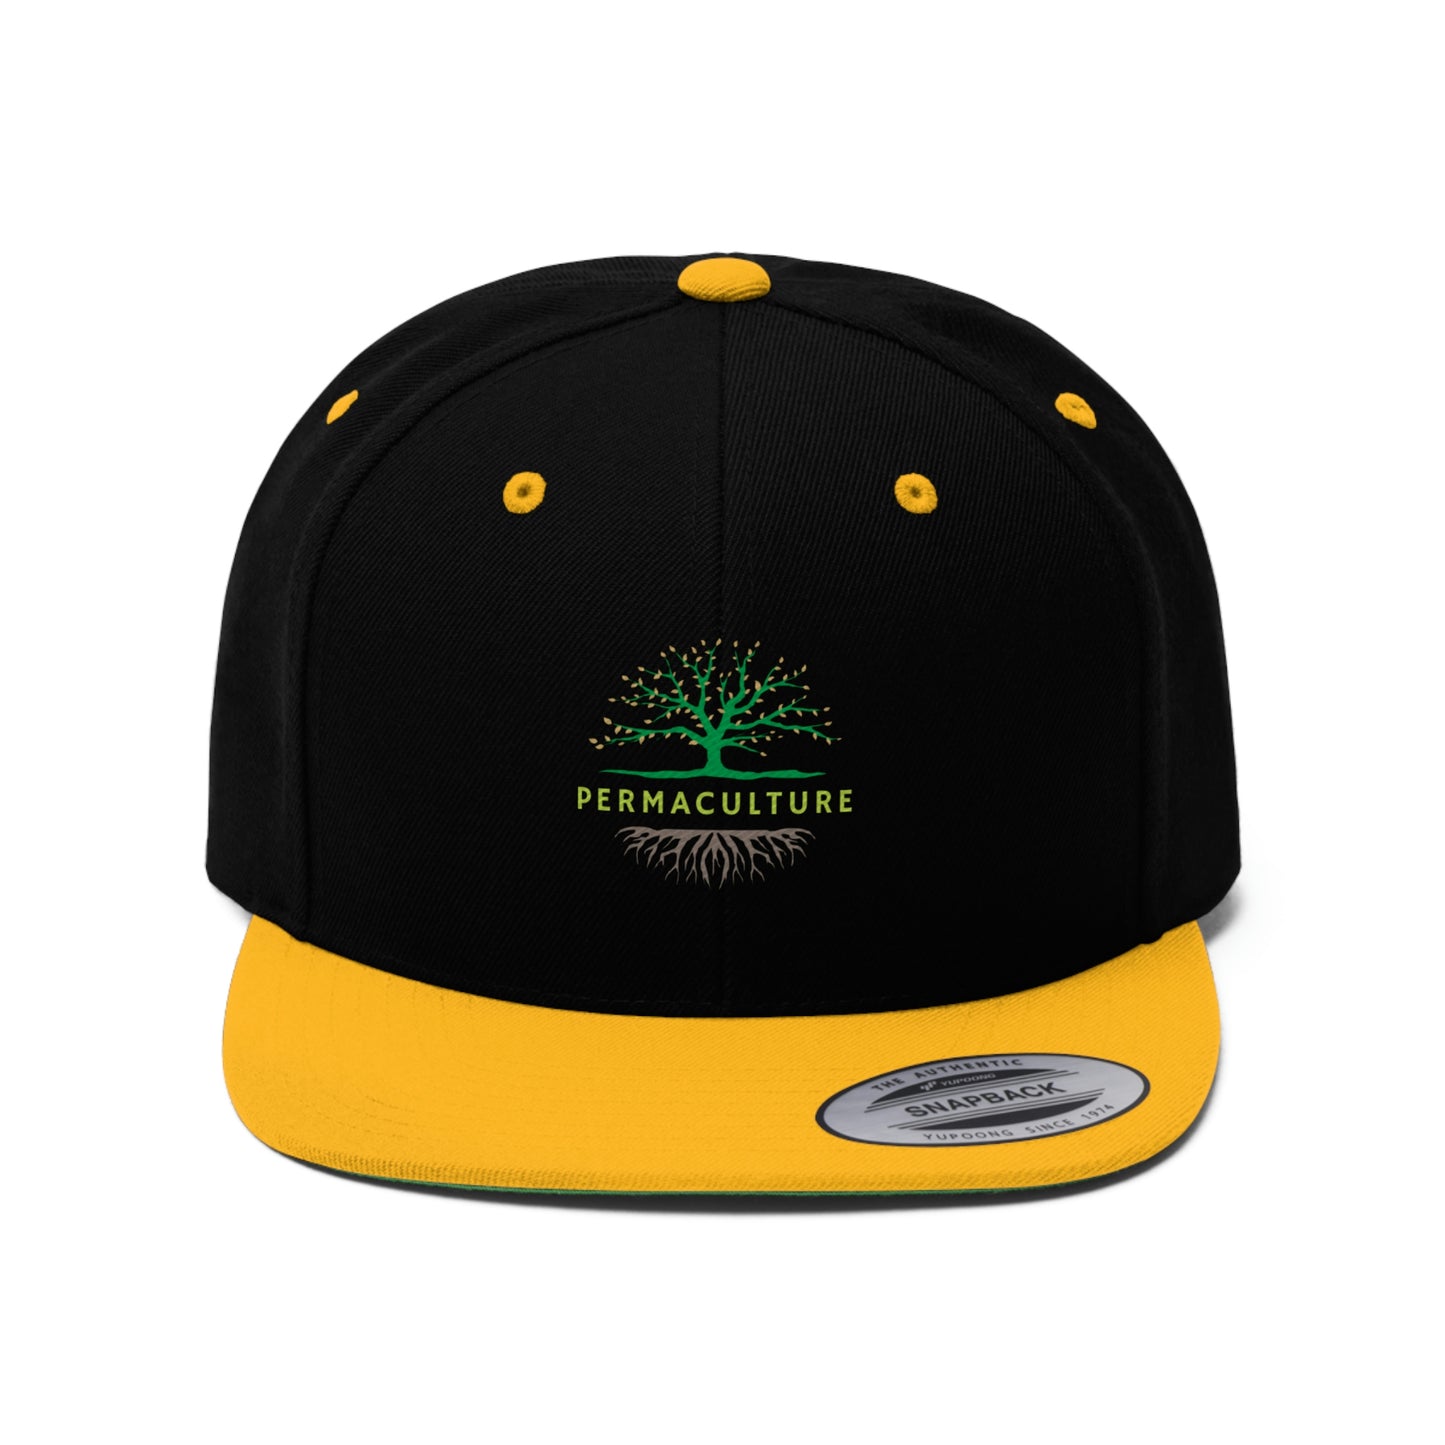 Permaculture Flat Bill Hat